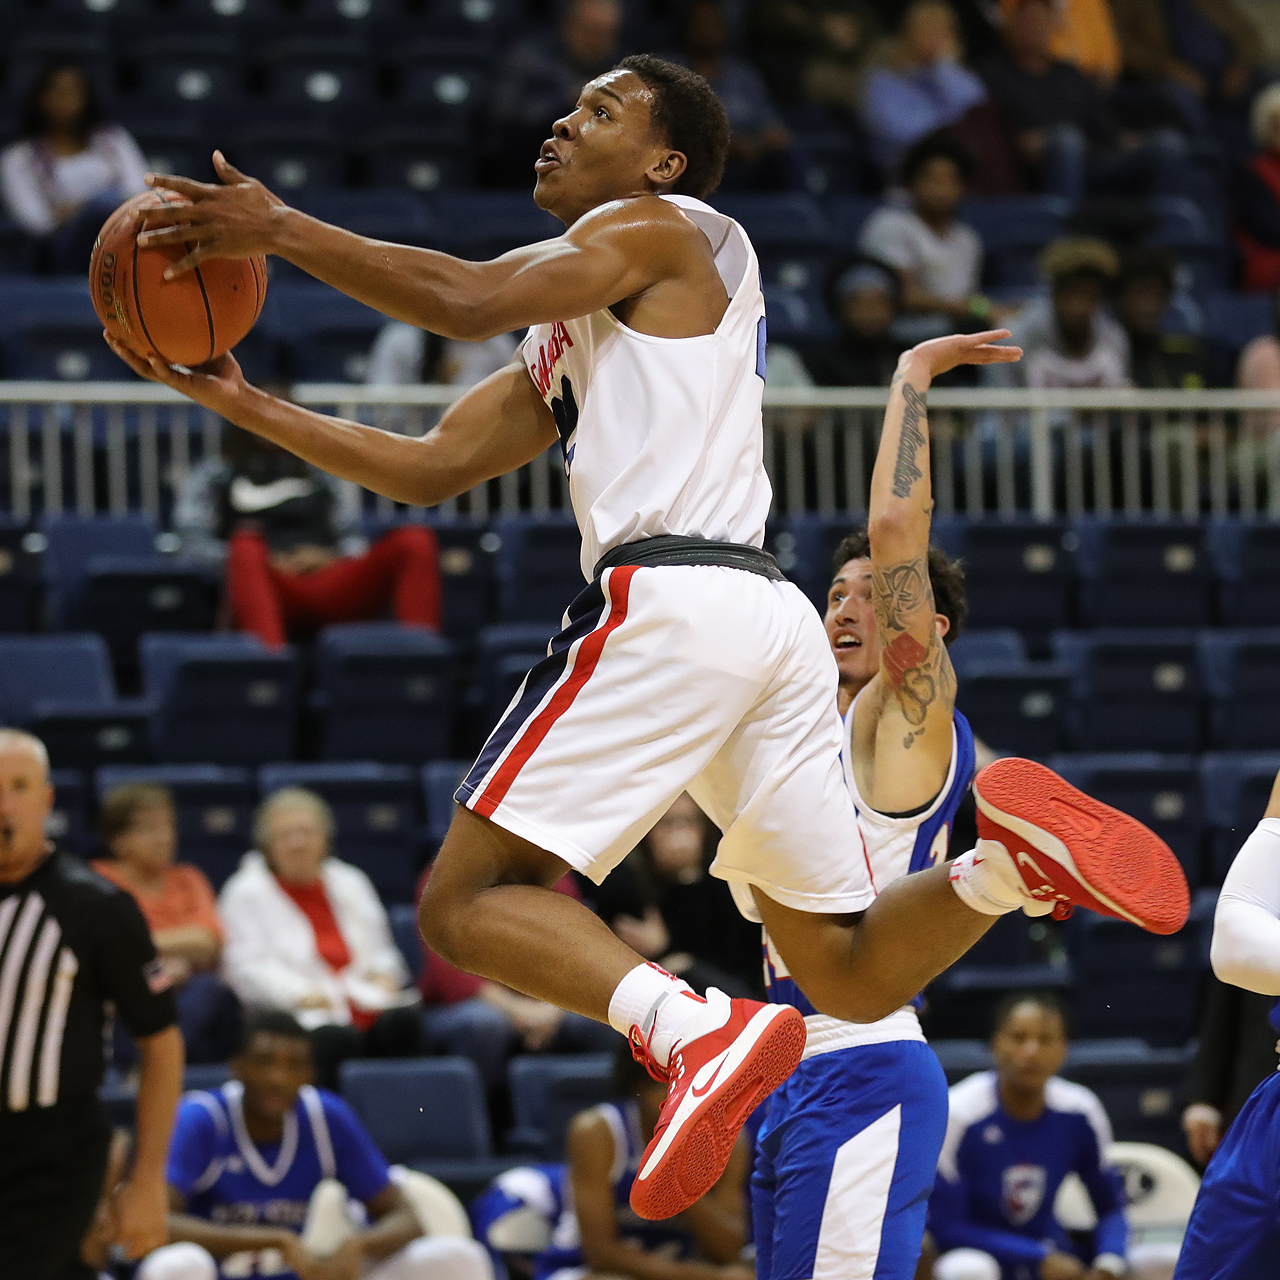 Indians fall to Volunteer State, 82-75